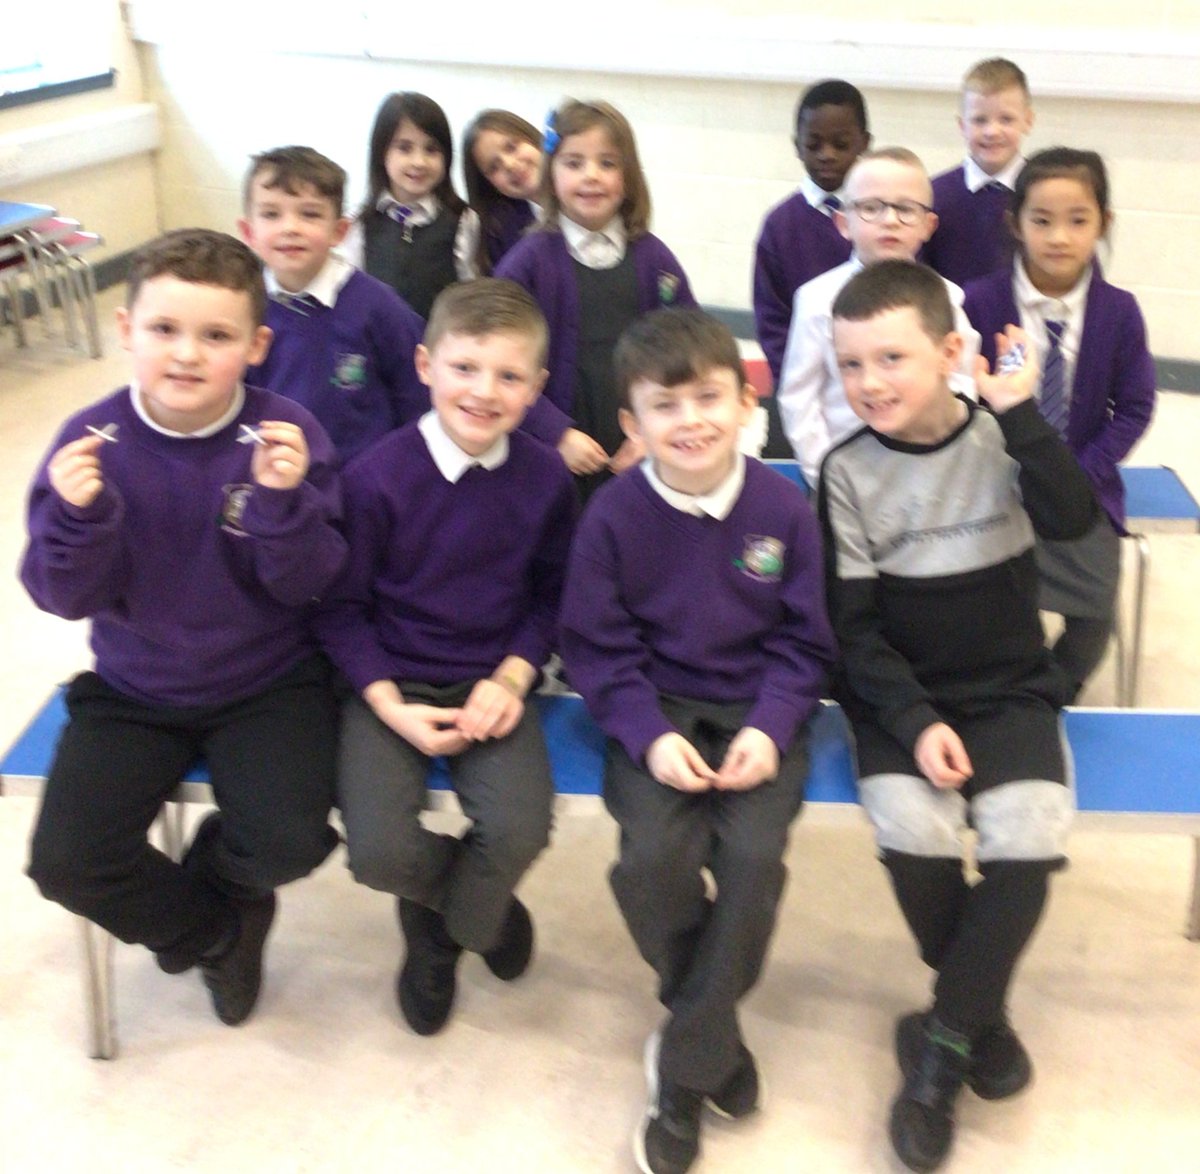 P1-P3 assembly @StMonicaMilton on Monday 🟣 We learned about preparing for Lent, participating in a 'Heads and Tails' quiz. 🙏 🟣 @MrsMonaghan2 helped us celebrate 'World Gaelic Week' by sharing greetings. 🏴󠁧󠁢󠁳󠁣󠁴󠁿 🟣 We celebrated birthdays & 'Pupils of the Week' @Educ8ingInHeels